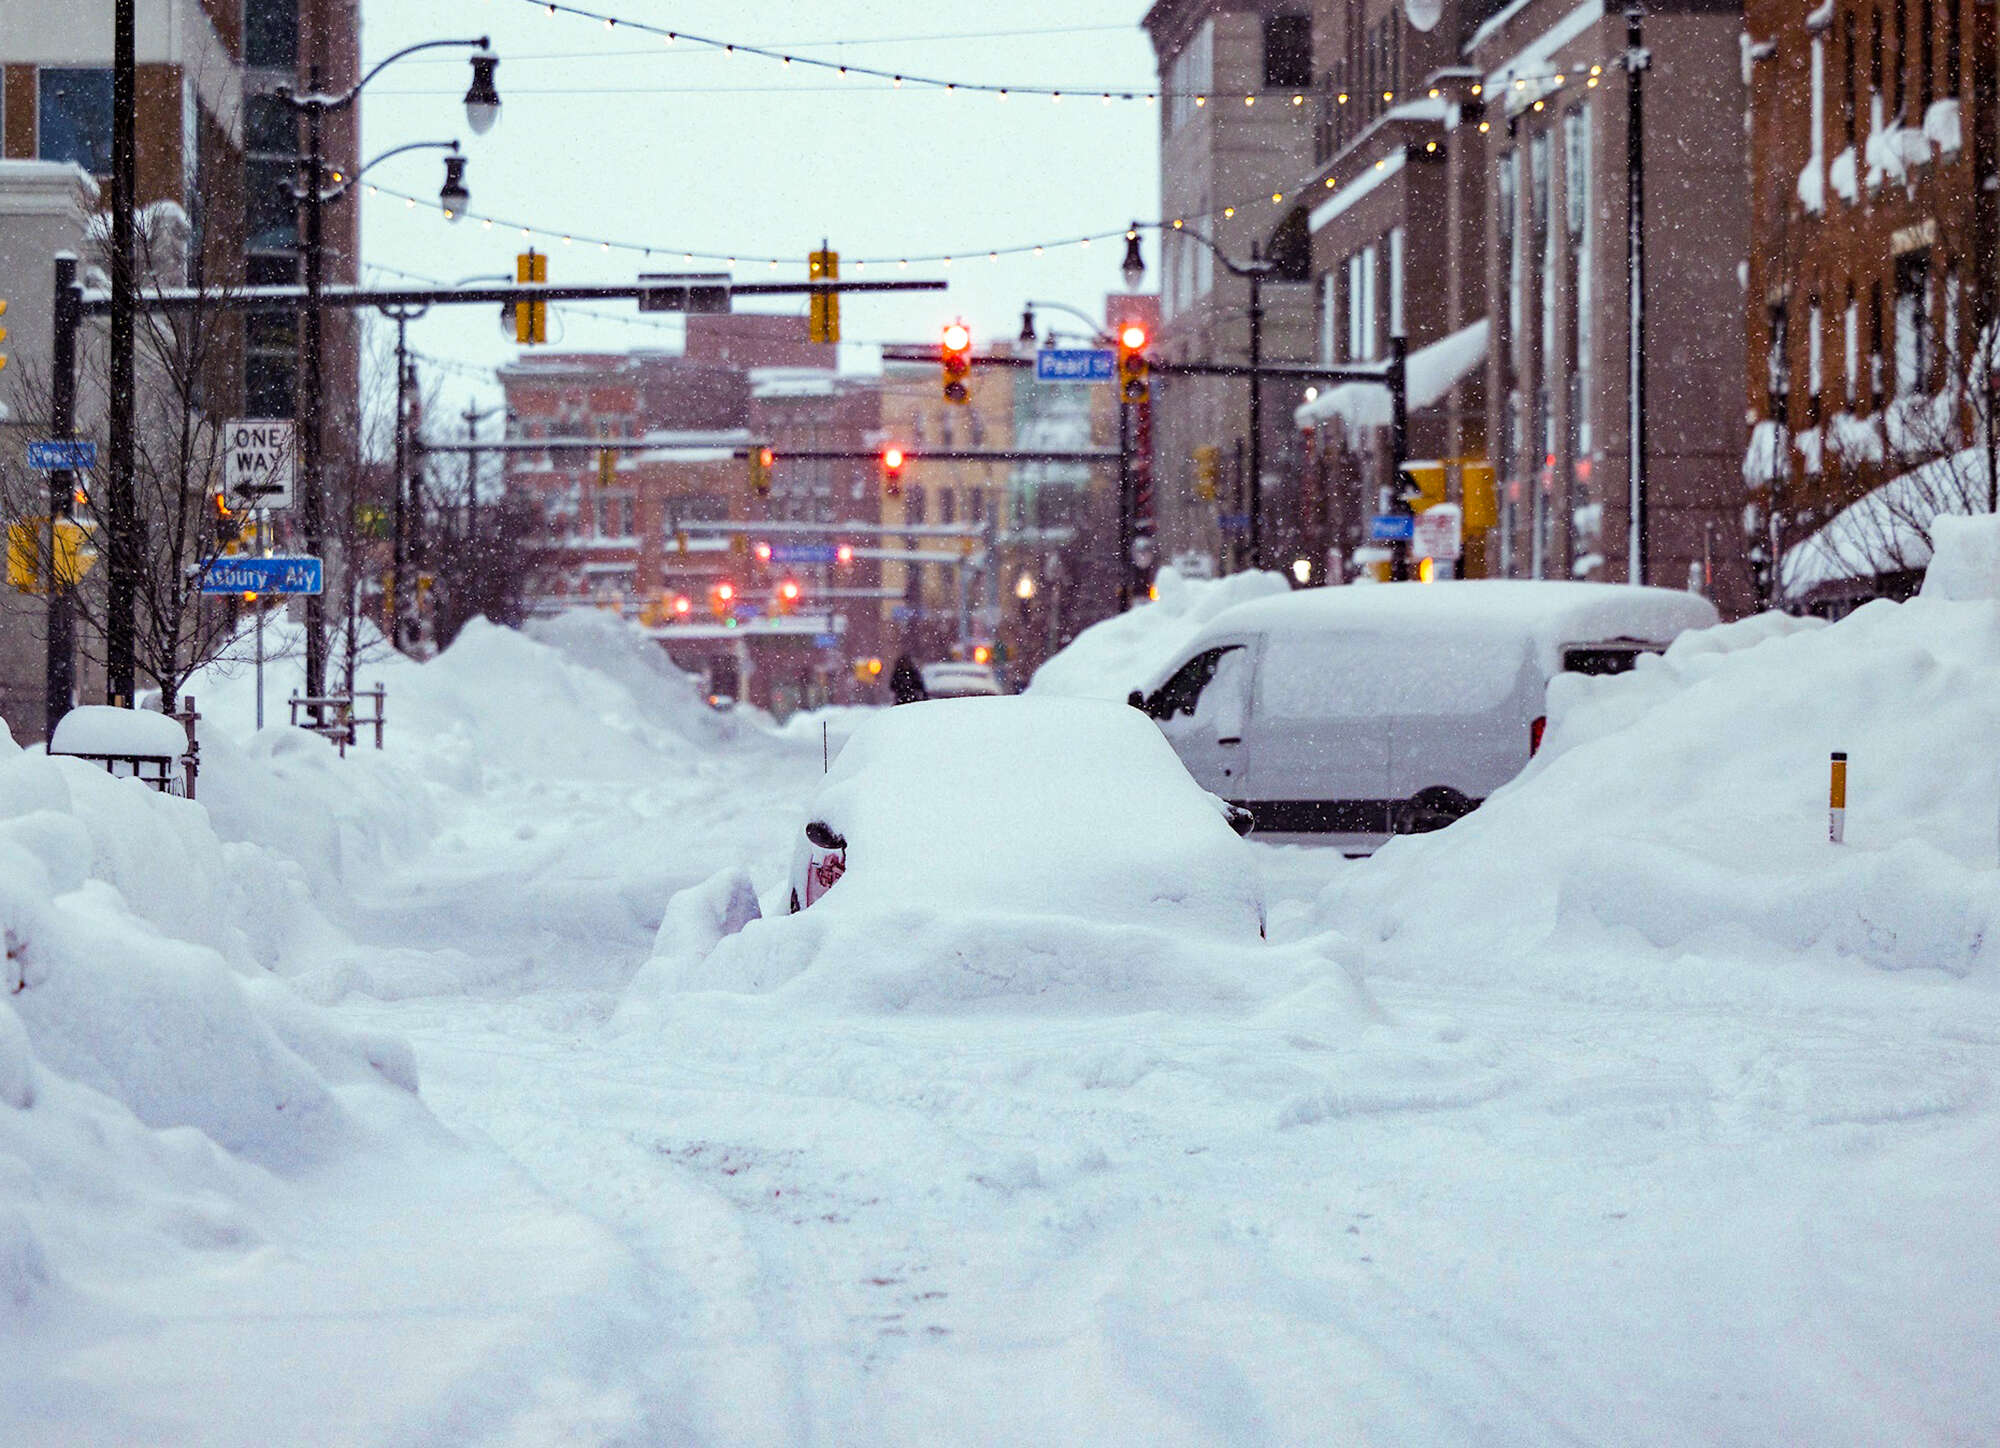 In this handout photo from the Office of Governor Kathy Hochul vehicles are seen trapped under heavy snow in the streets of downtown Buffalo, New York, on December 26, 2022. - US emergency crews counted the grim costs of a colossal winter storm that brought Christmas chaos to millions, especially in hard-hit western New York, where the death toll reached 25 Monday in what authorities described as a 